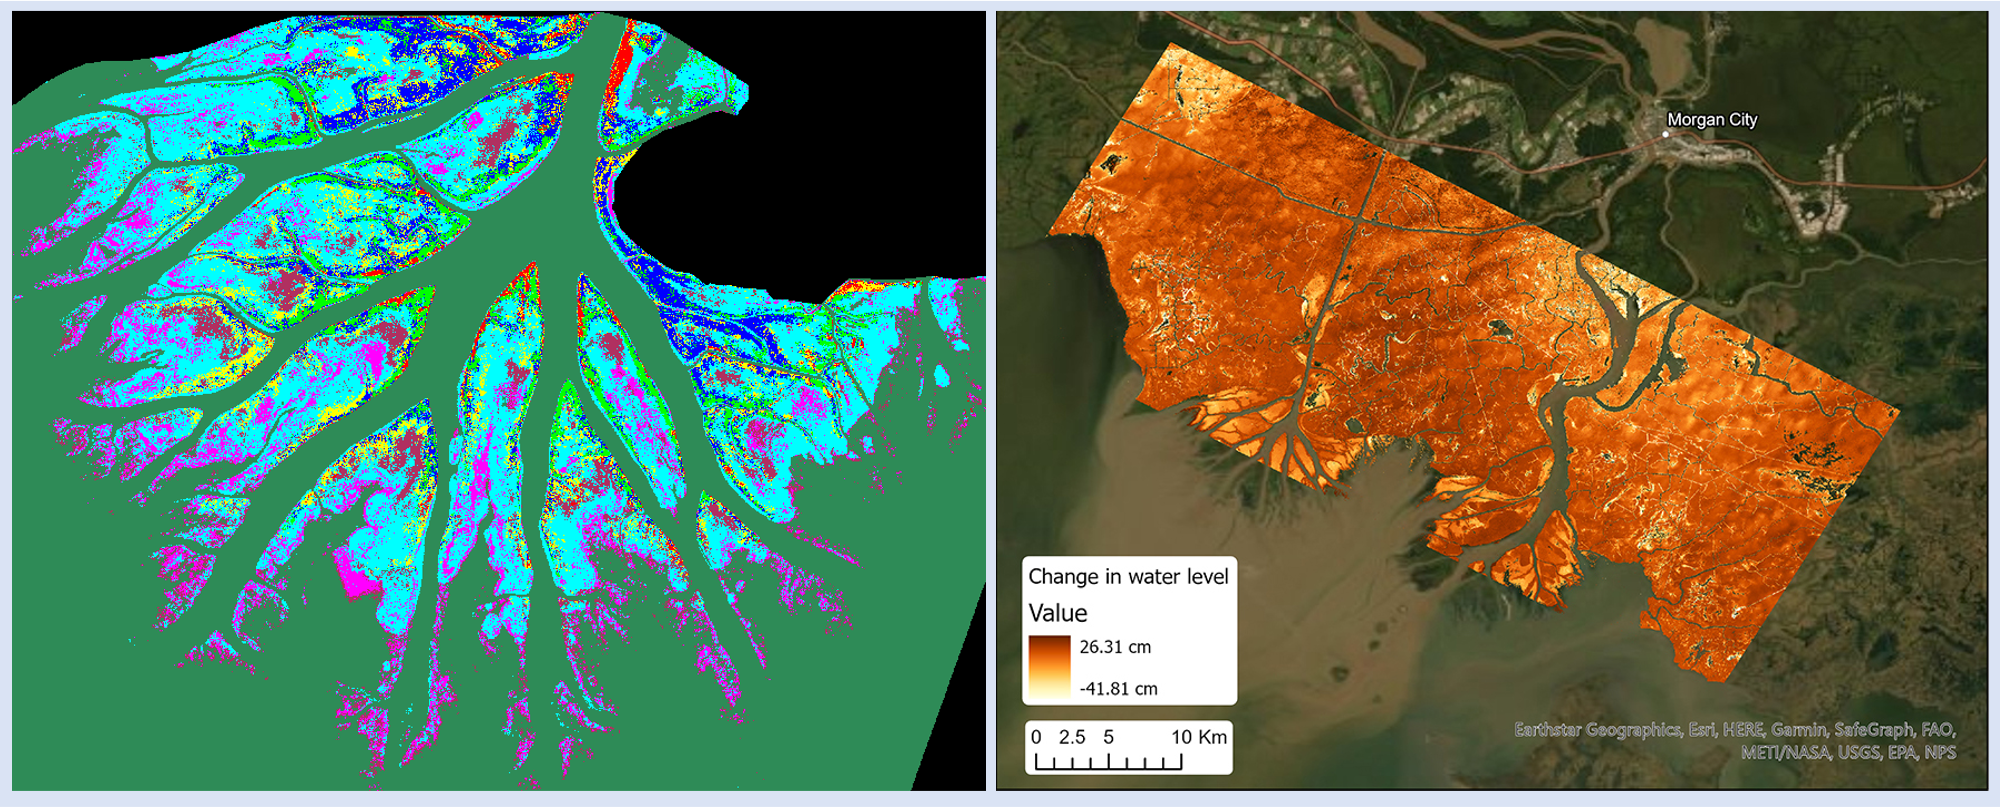 Side-by-side maps. Left: Delta colored in to indicate vegetation types. Right: Changes in water level indicated in shades of yellow, orange, and red, with darker colors indicating greater water change.